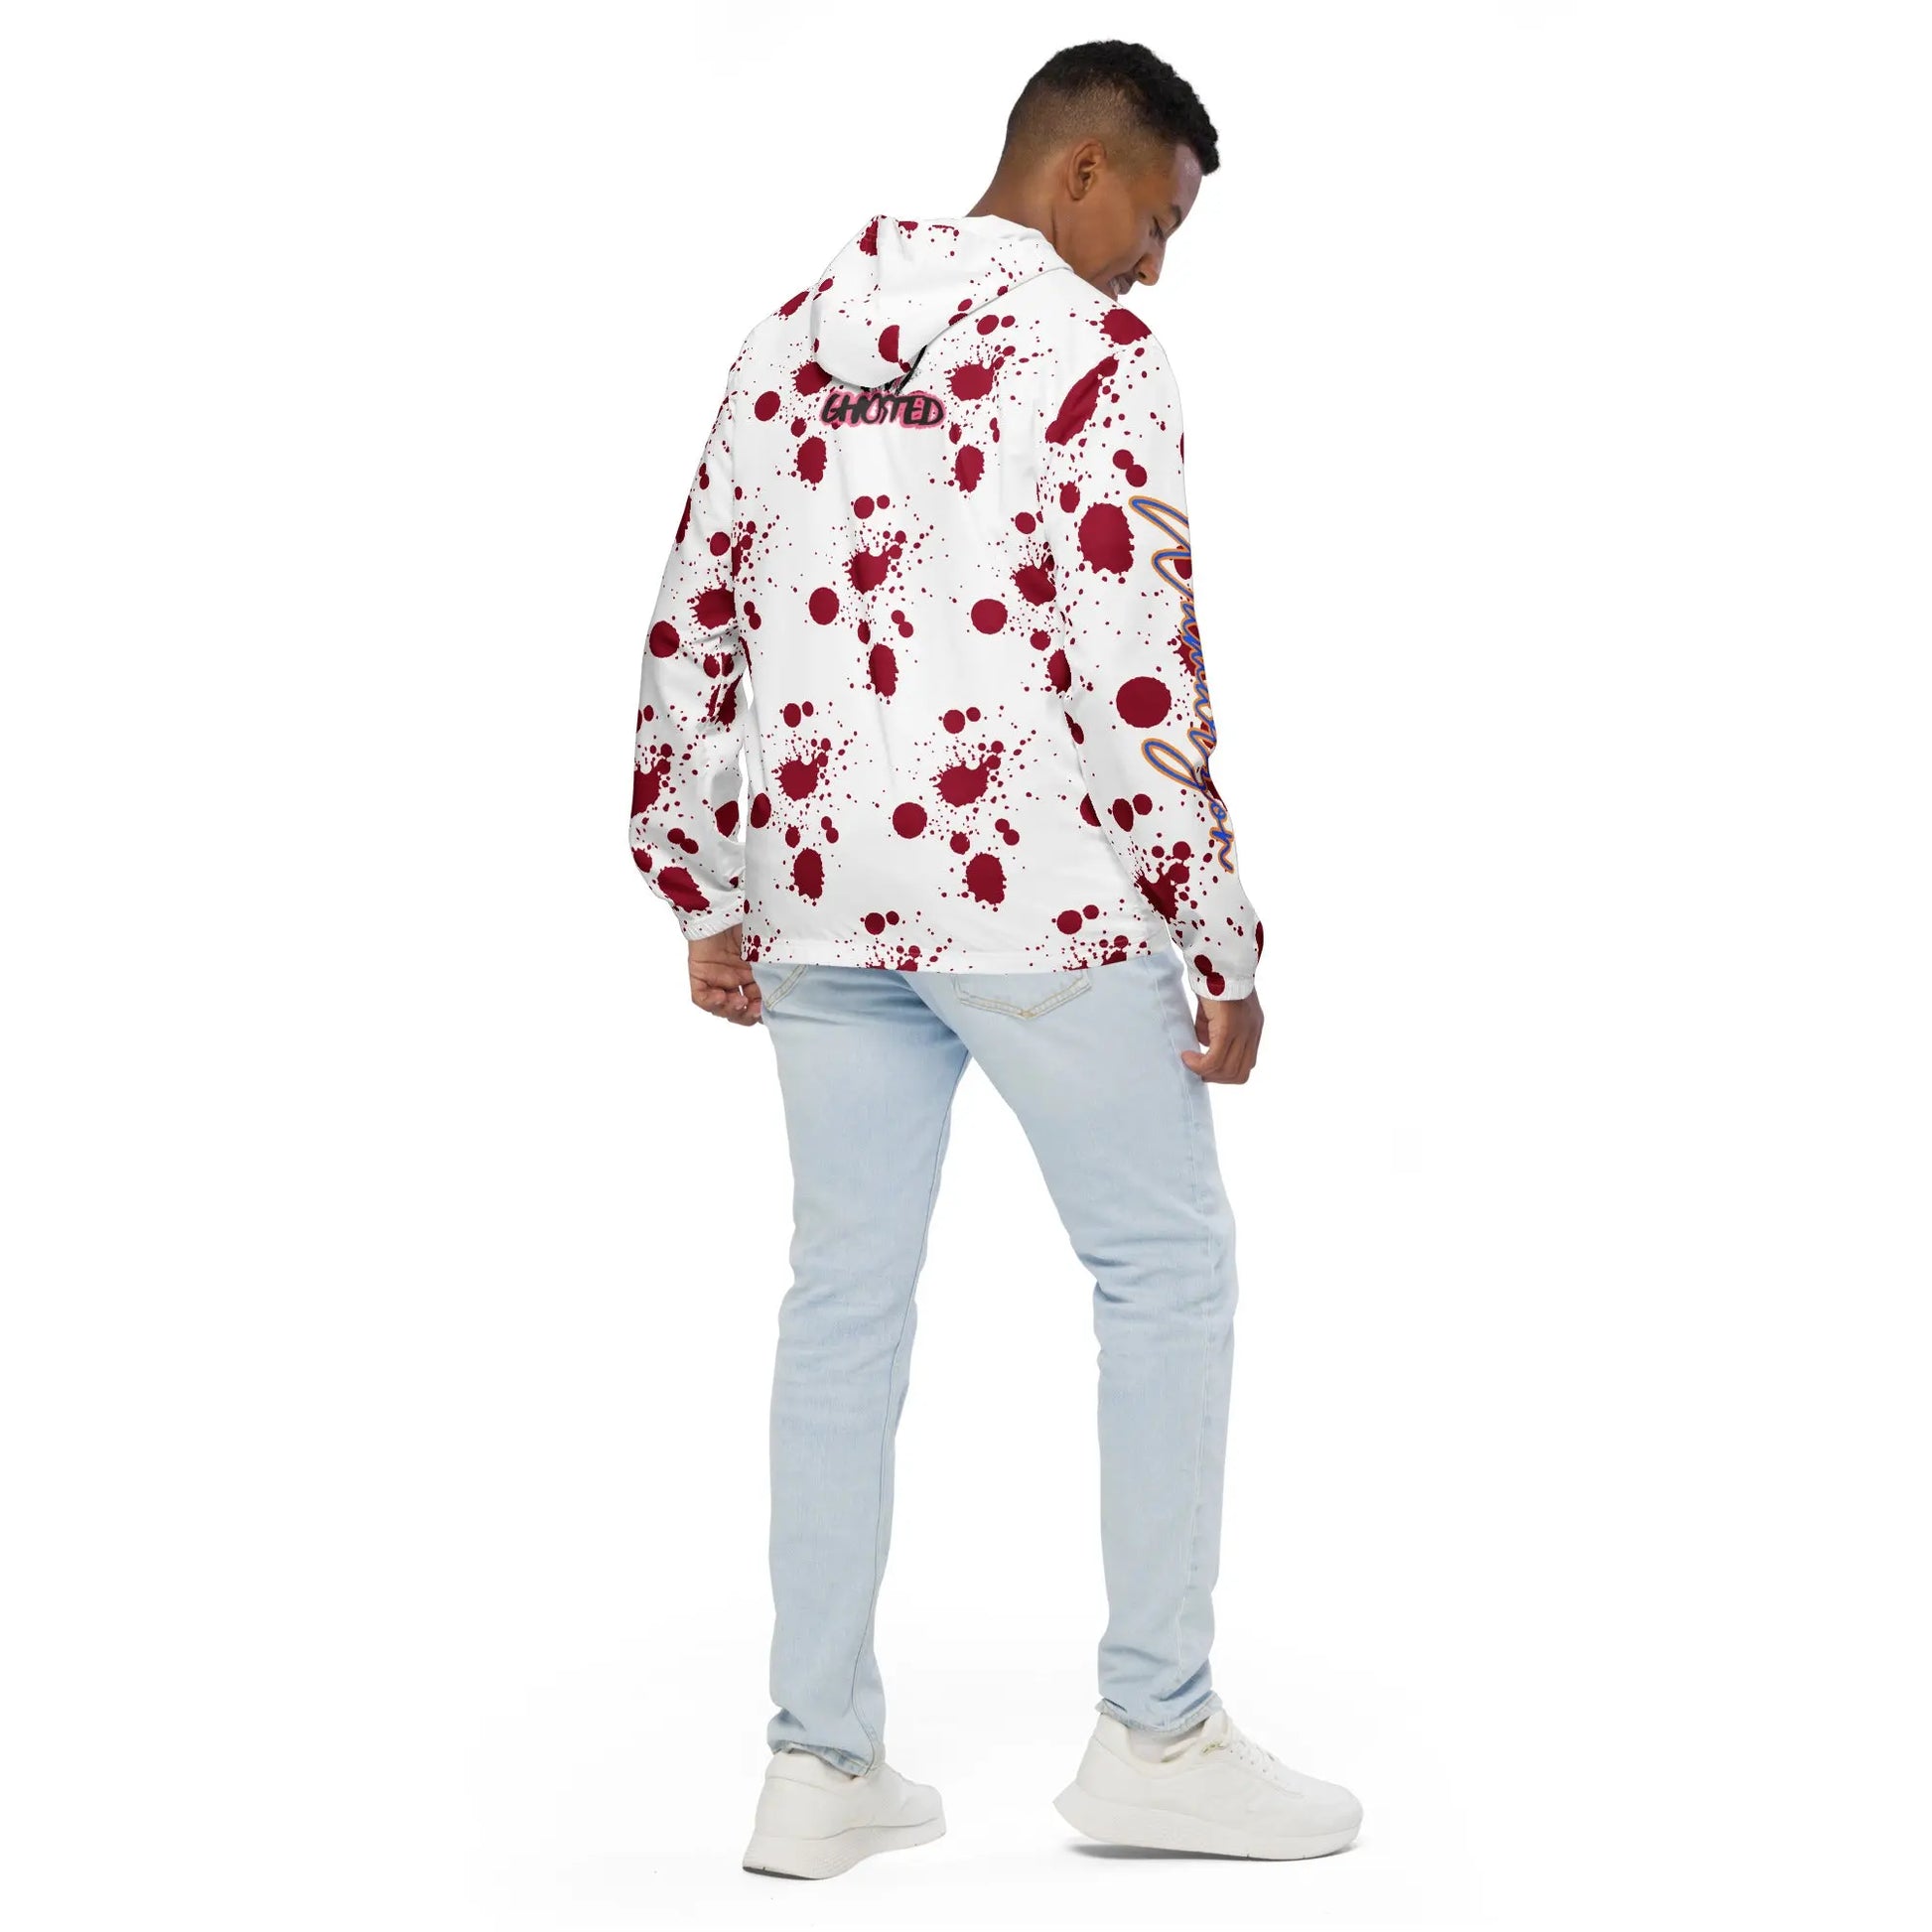 Wamarzon's Ghosted Men’s windbreaker - Image #9